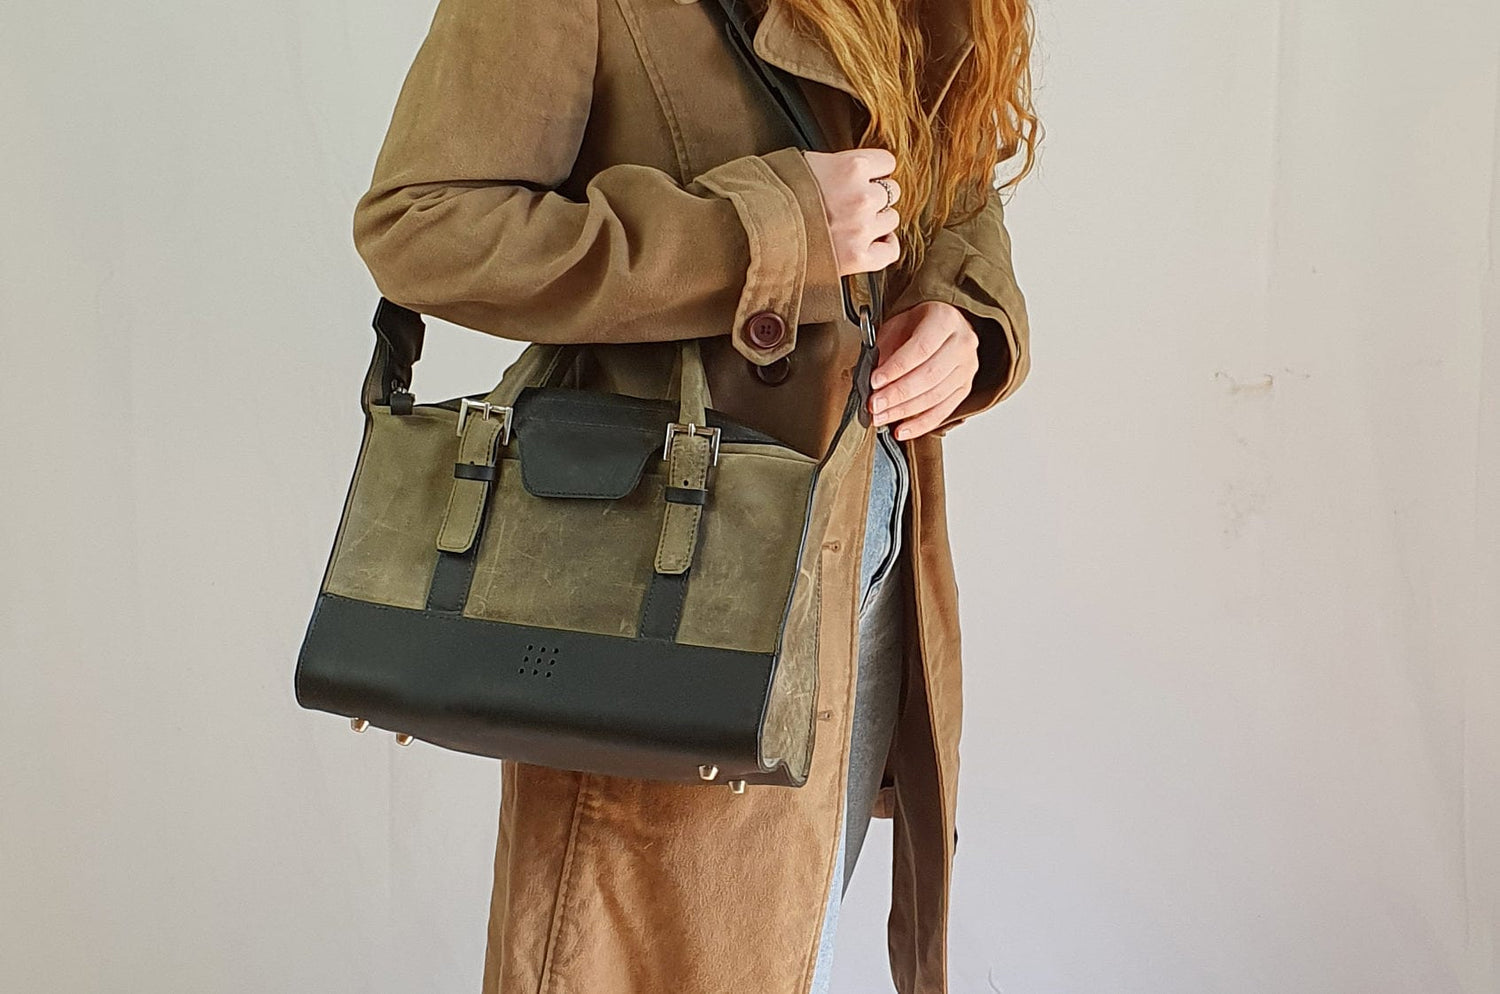 Journey Leather Laptop Bag- Made in South Africa